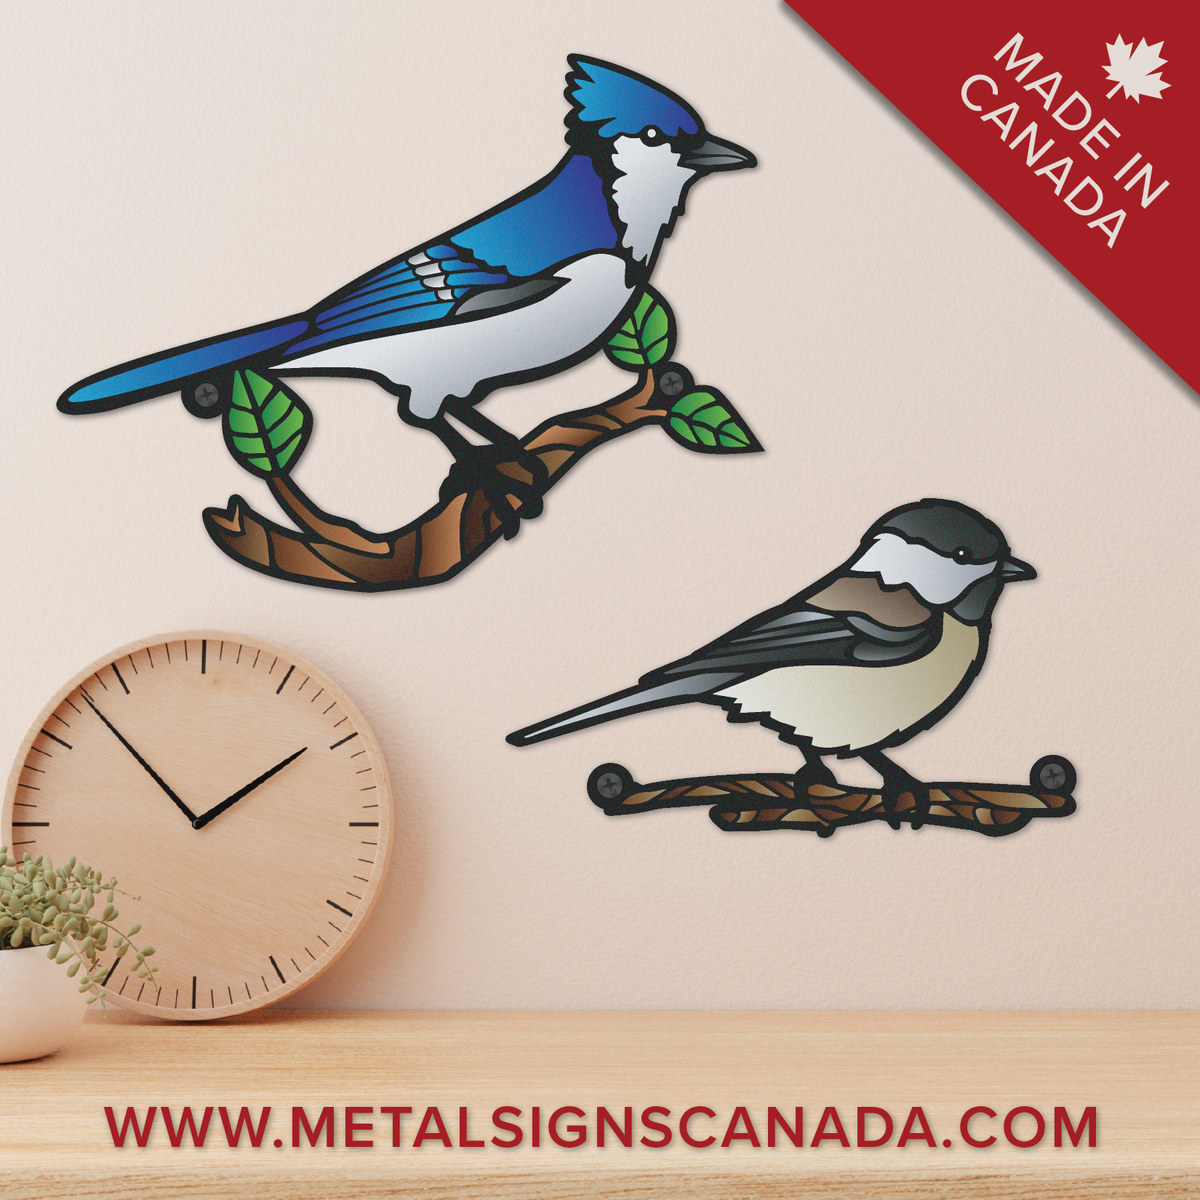 Bring Nature into Your Home with Metal Signs Canada's Printed Bird Collection